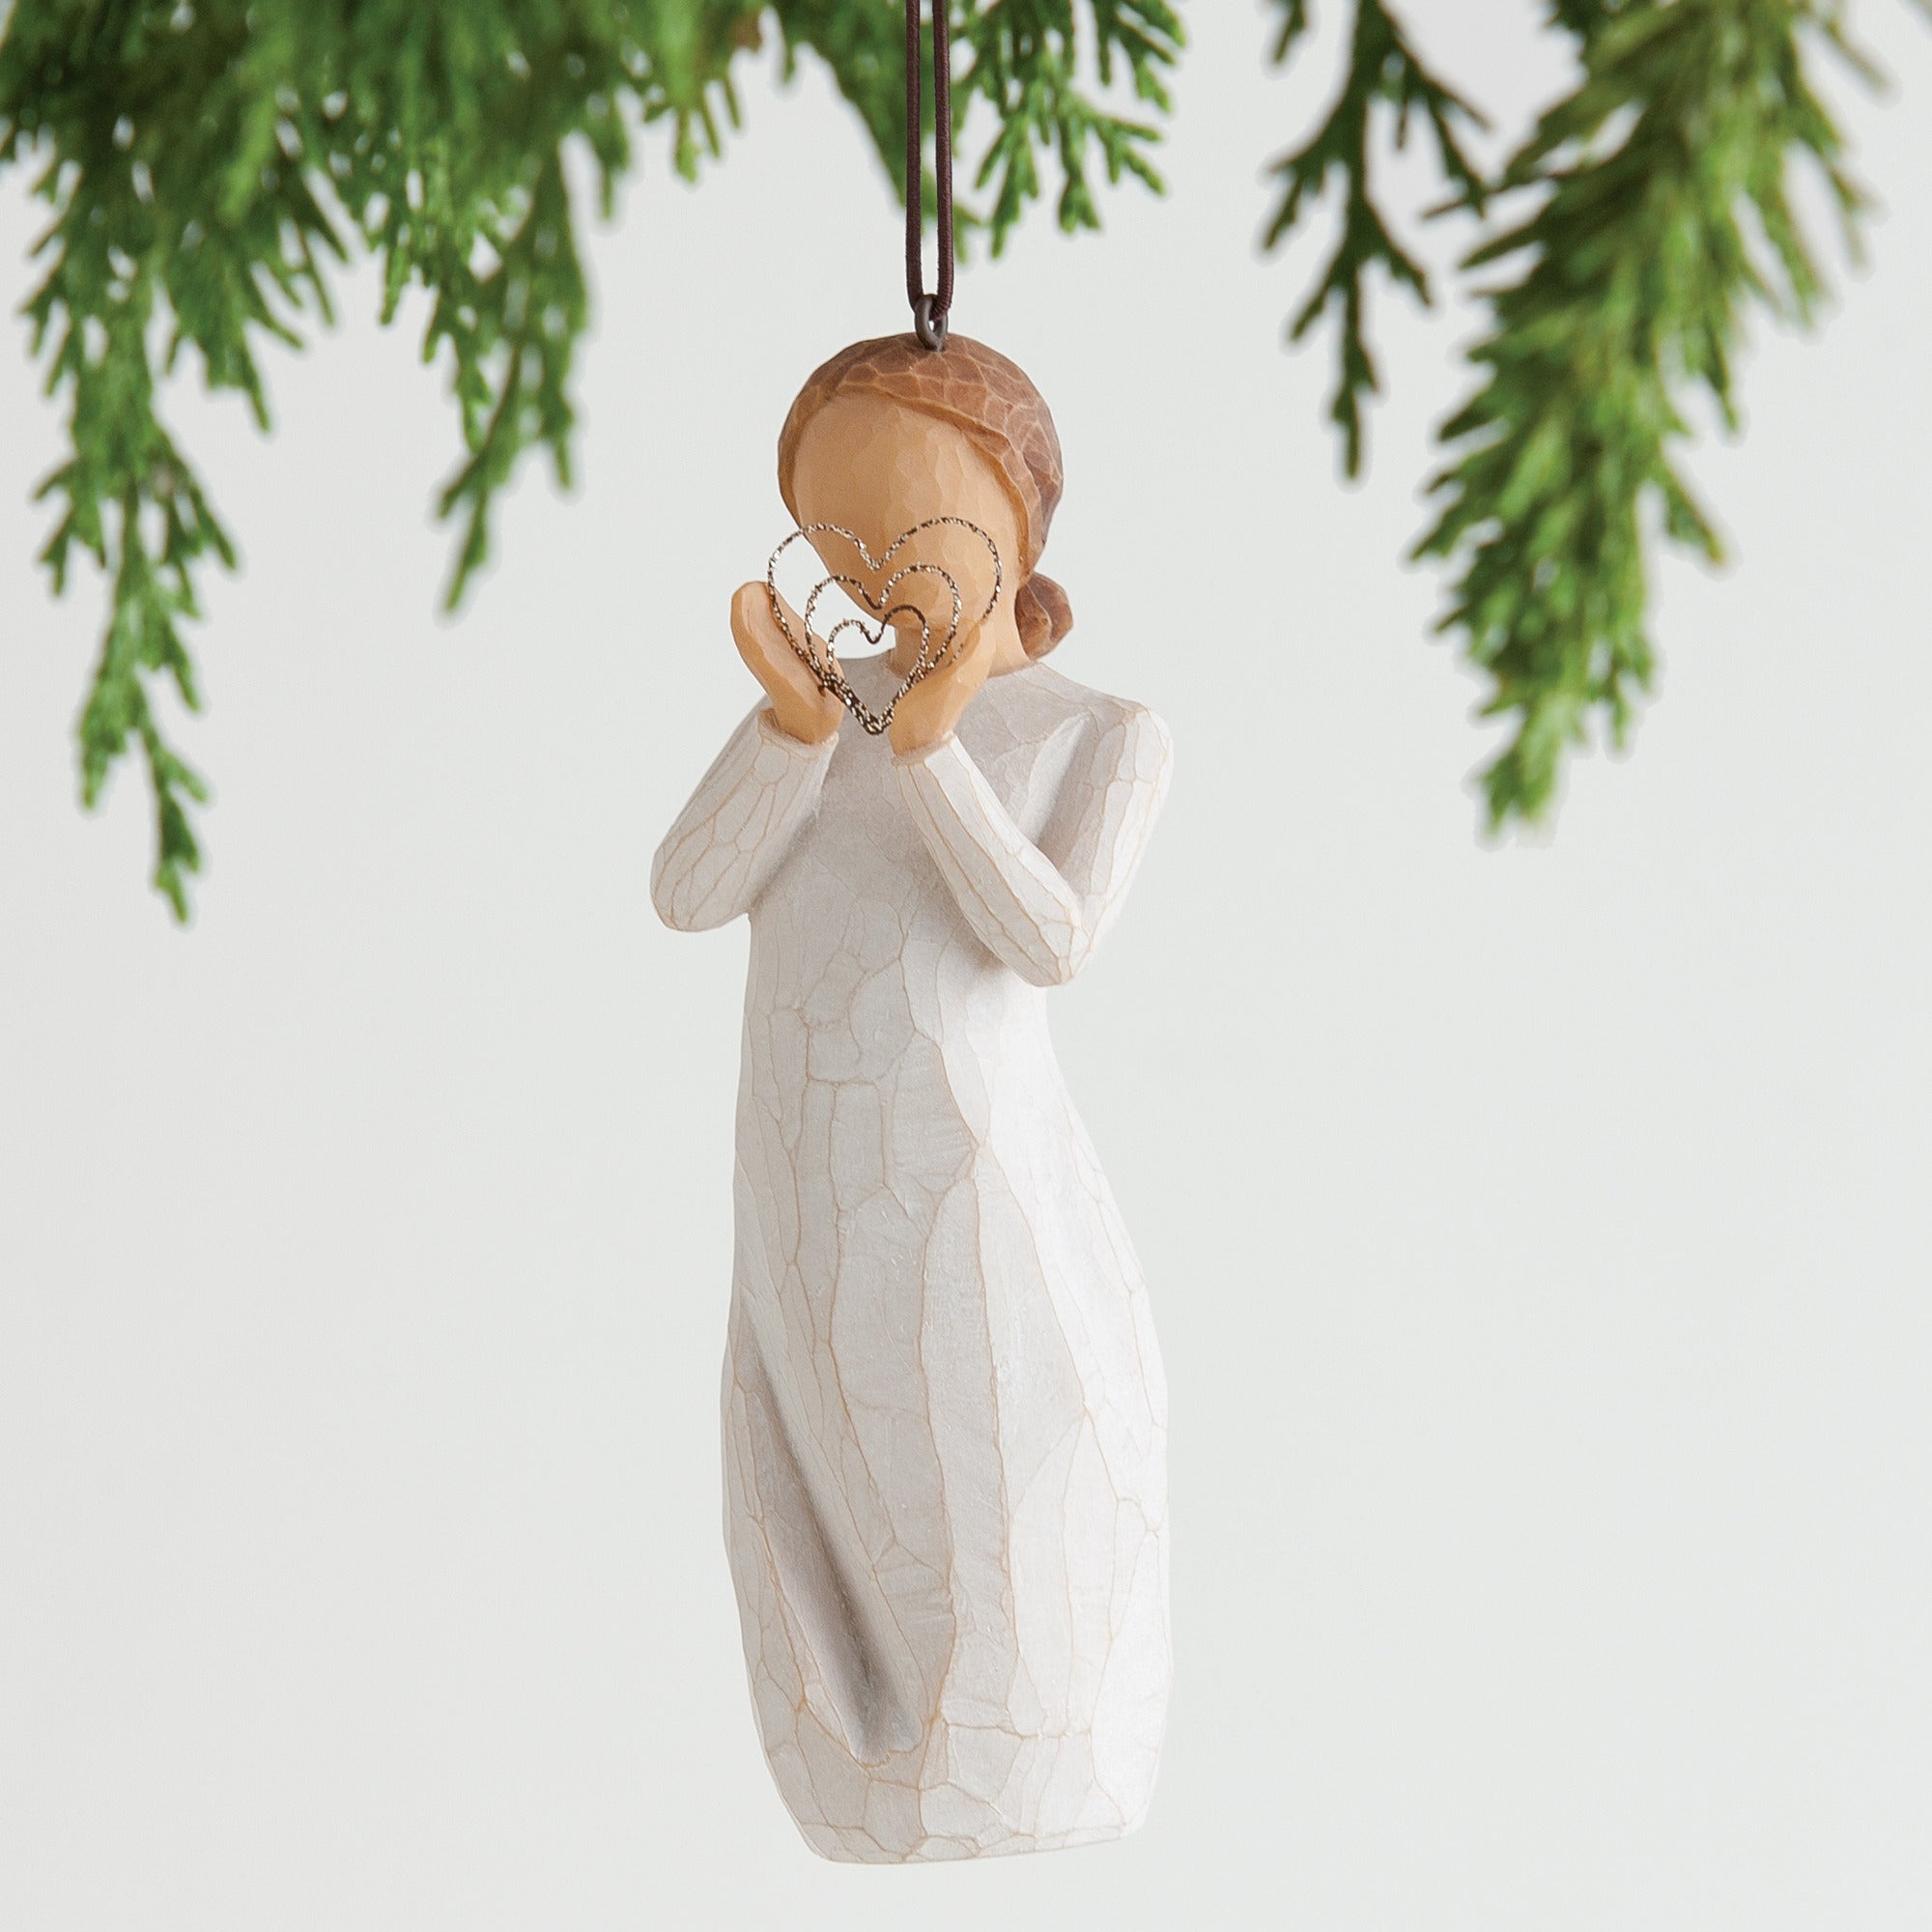 Willow Tree: Lots of Love Ornament